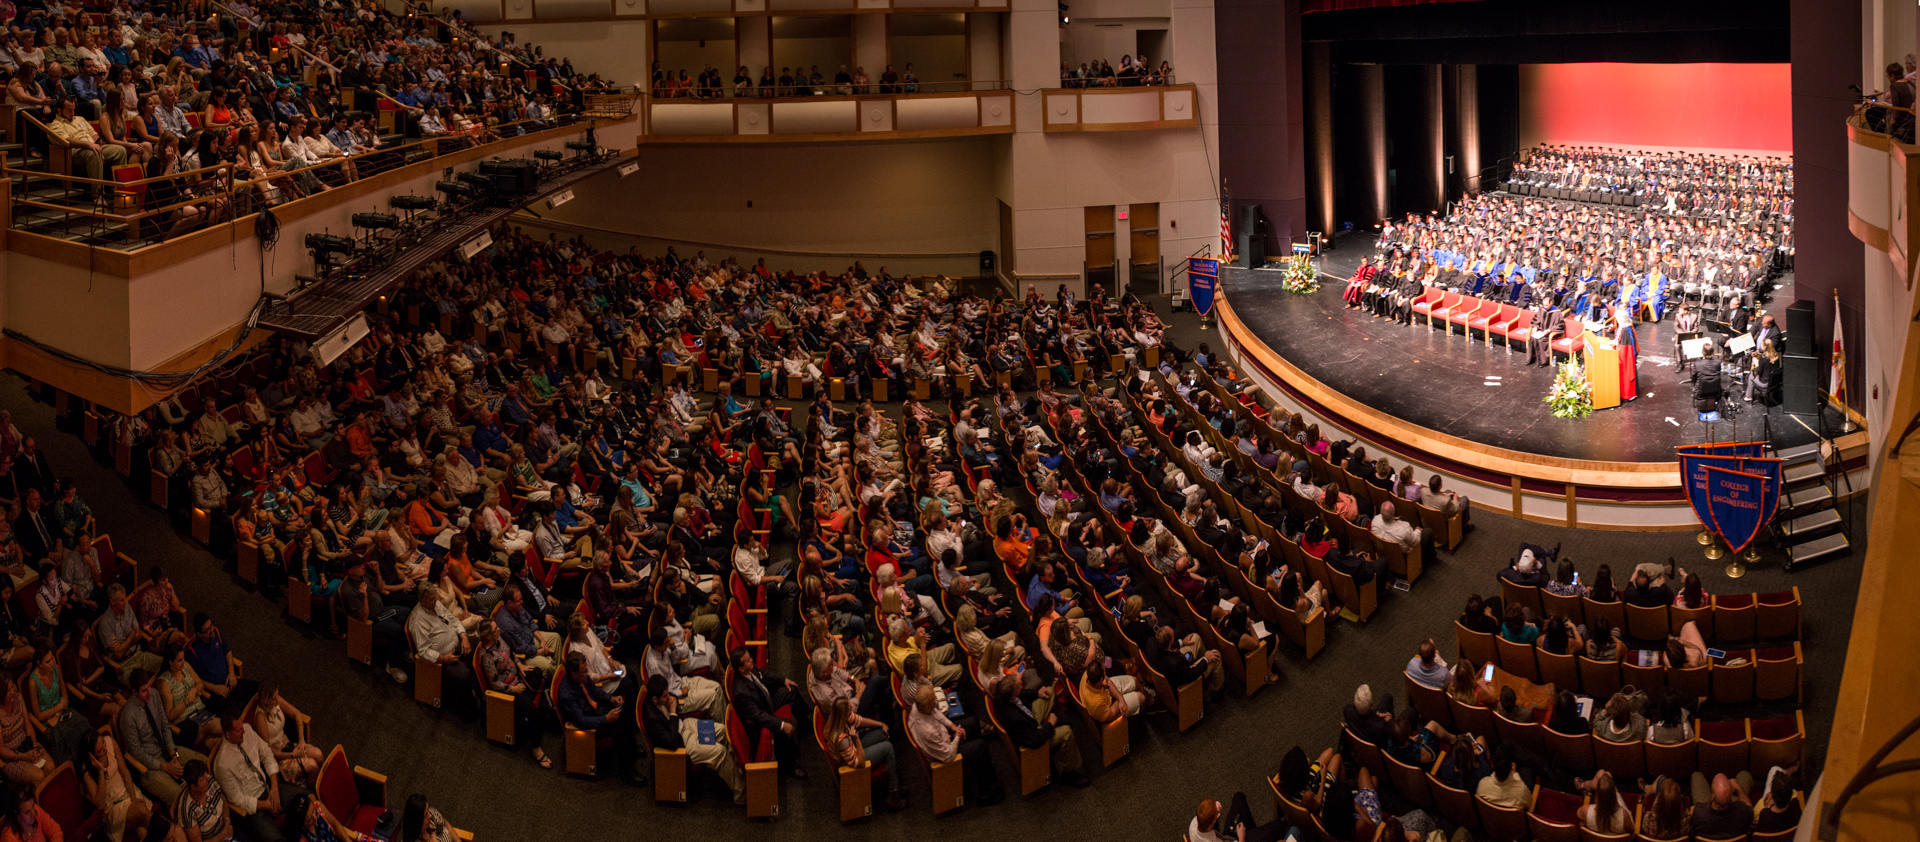 The University of Florida's College of Engineering commencement ceremonies for all undergraduate programs were held at the Phillips Center for Performing Arts on UF's campus in Gainesville, Florida.